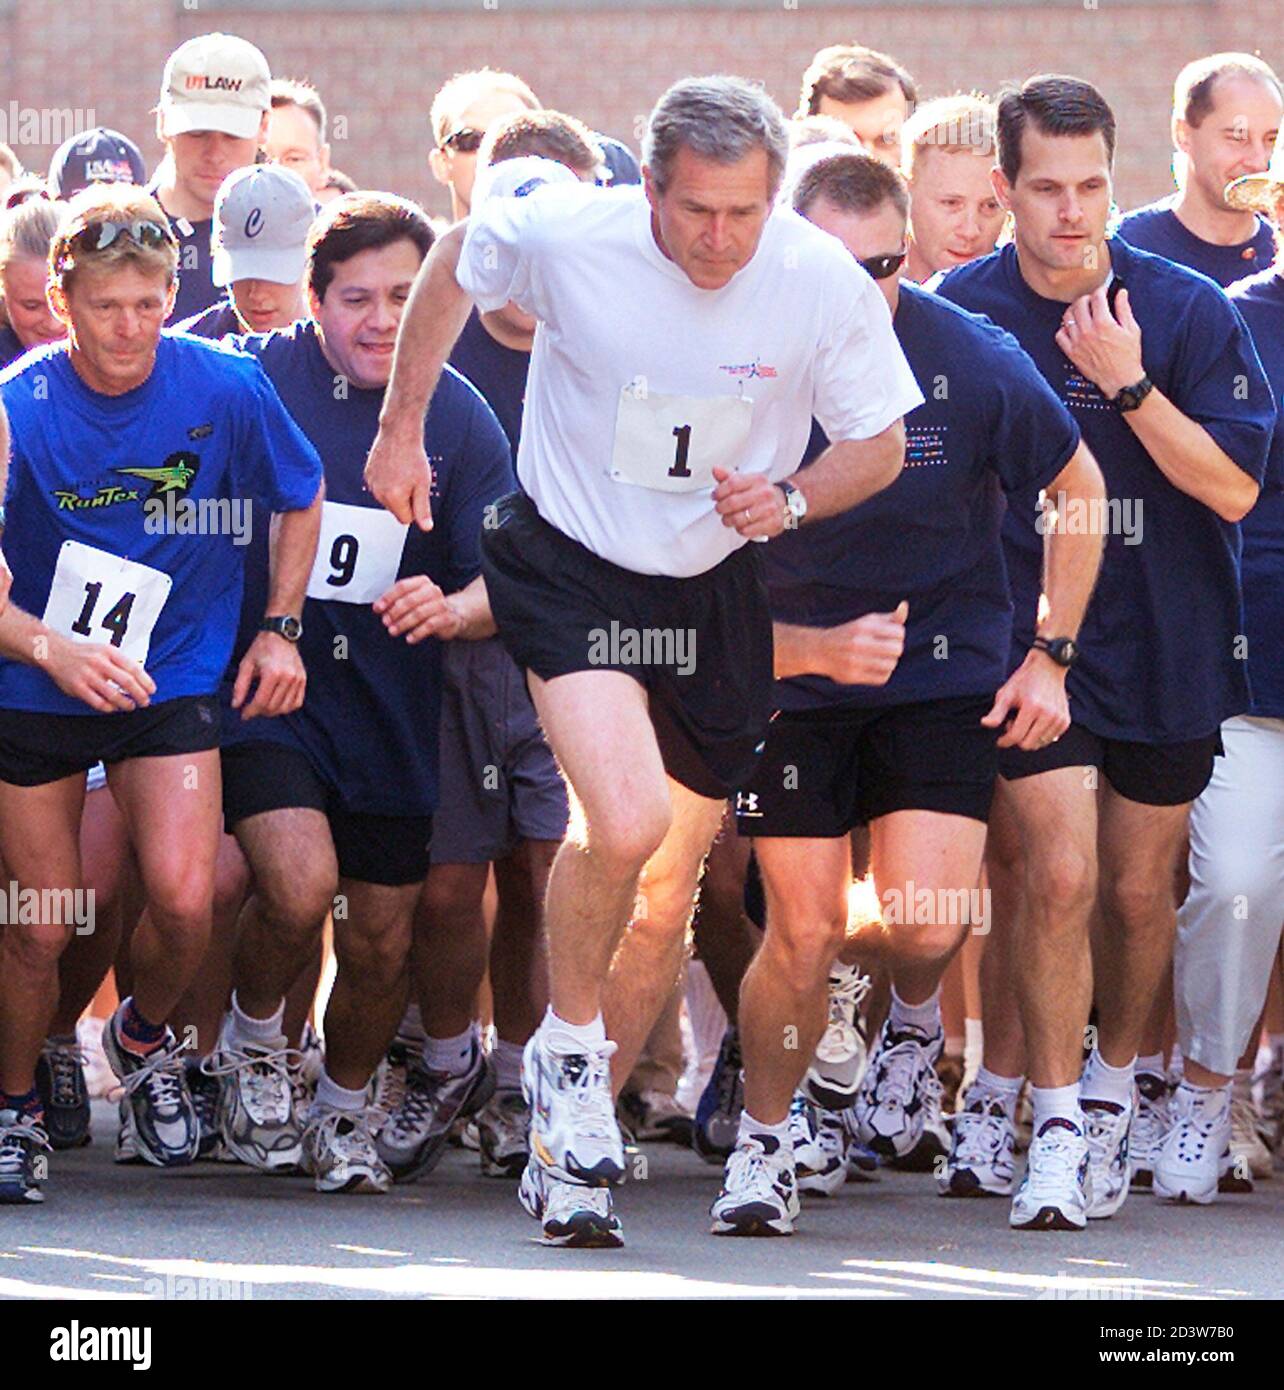 U.S. President George W. Bush (1) participates in The President's Fitness Challenge, a three-mile run at Fort McNair in Washington, June 22, 2002. Bush finished the run at 20 minutes and 28 seconds. The president unveiled his HealthierUS initiative on June 20 which calls for at least a half-hour of exercise every day for adults and more for children, eating smaller portions of more nutritious foods, regular preventative health screenings and avoidance of any risky behaviors, especially involving alcohol, tobacco and illegal drugs. REUTERS/Hyungwon Kang  HK Stock Photo